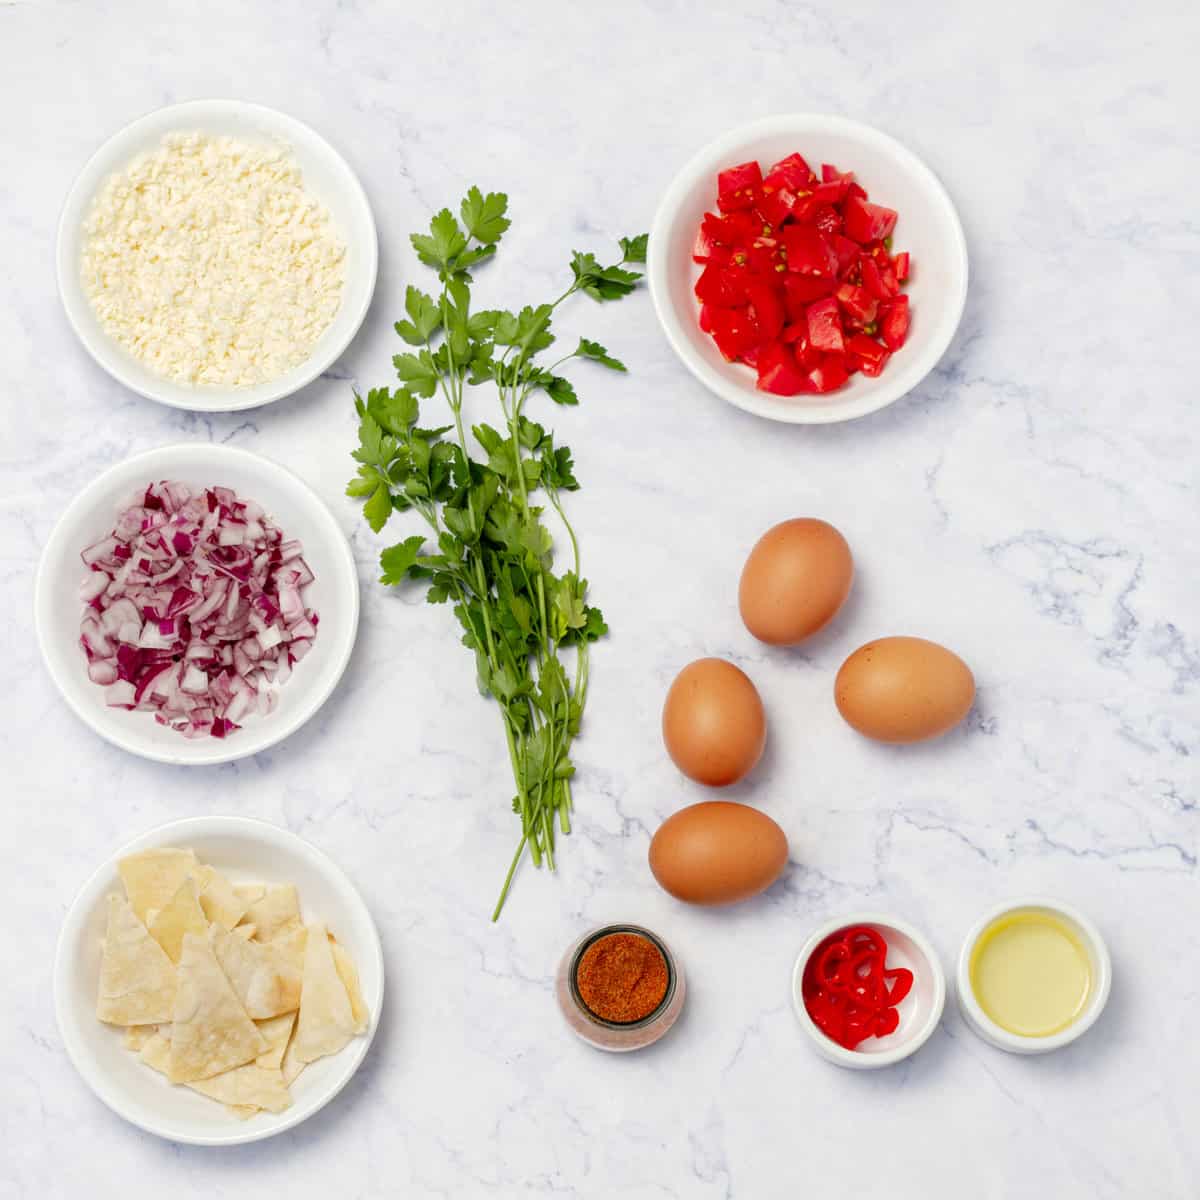 Migas Tex Mex Breakfast ingredients, incuding eggs, tortilla crumbs, tomatoes, onion, cilantro, cheese, and Tex-Mex spices. 